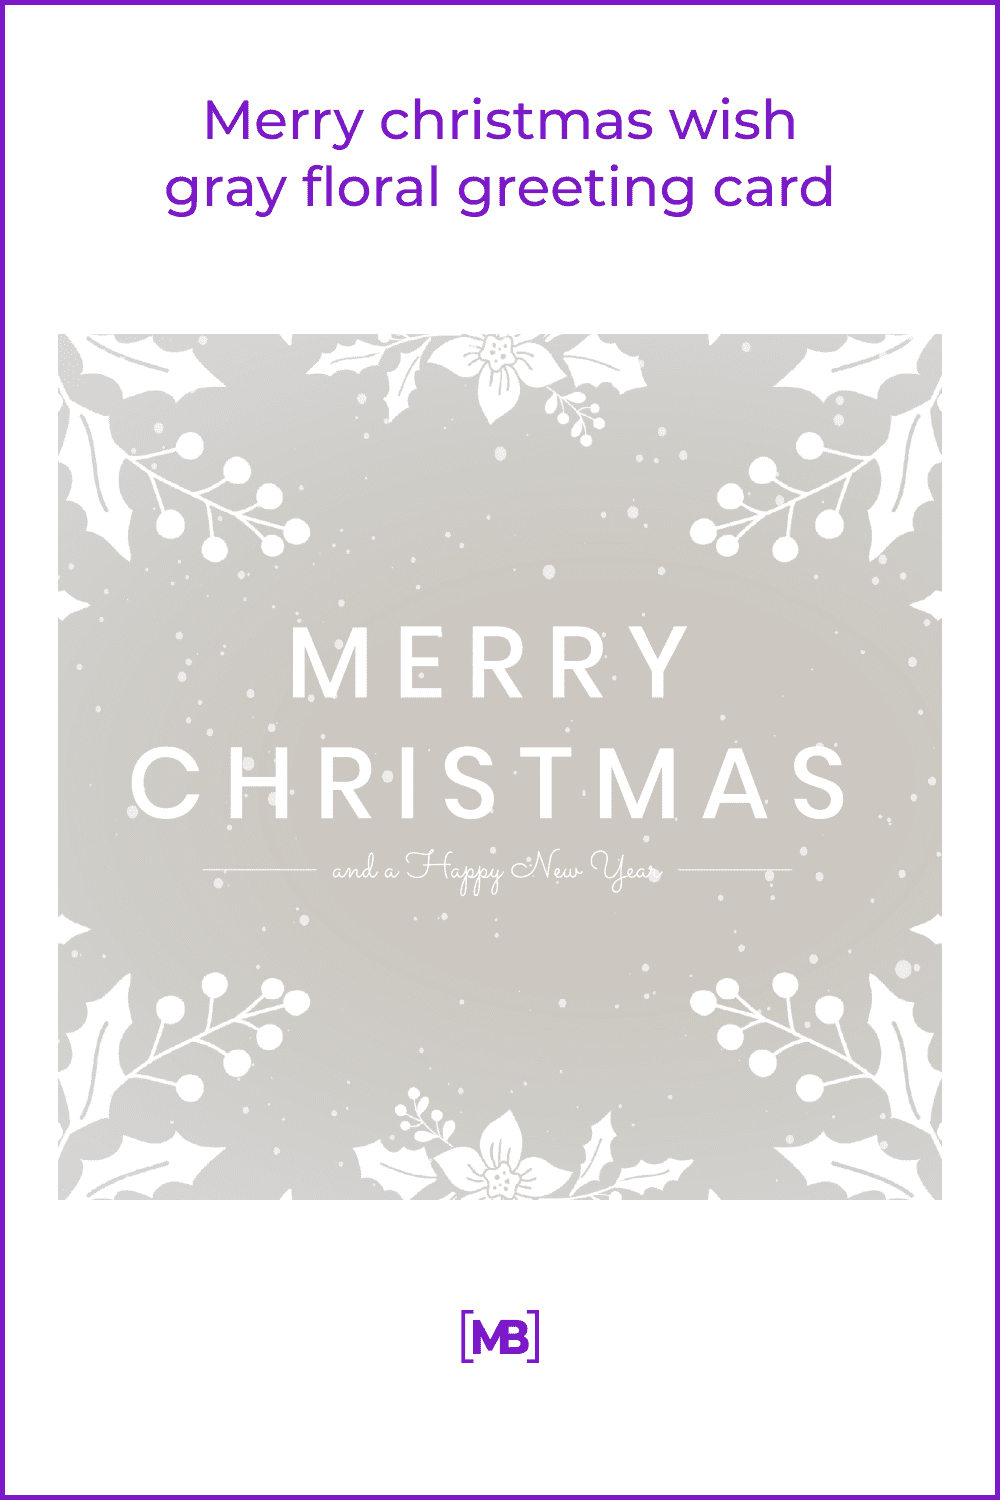 Merry Christmas lettering on a light purple background with white sprigs.